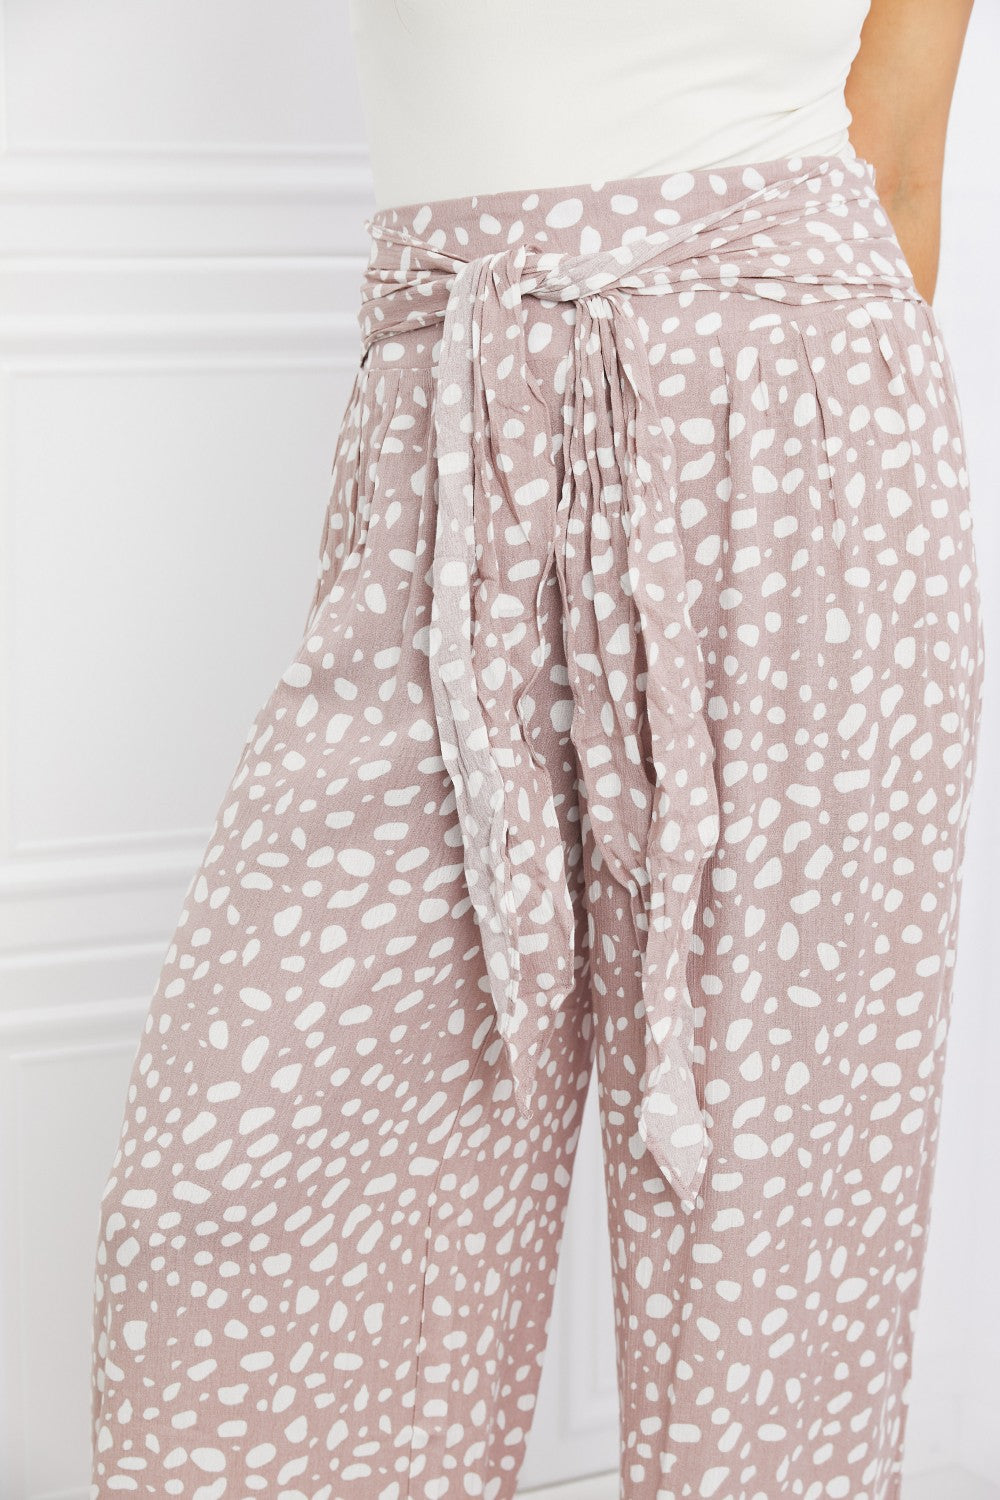 Kori  Animal Print Tied Pleated Wide Leg Pants - Coco and lulu boutique 